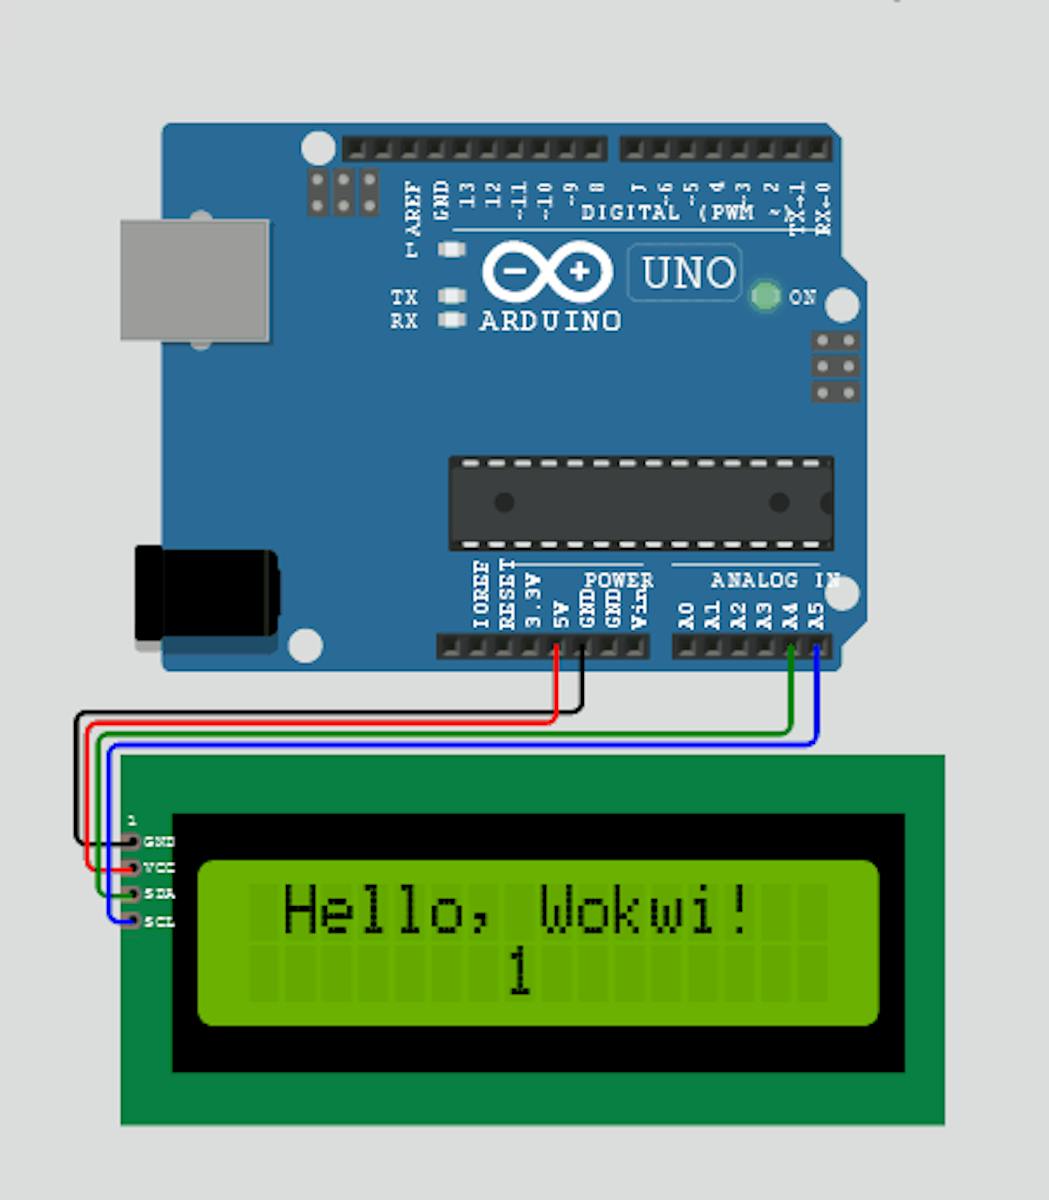 LCD screen for Arduino UNO onlys shows a row of white boxes on top